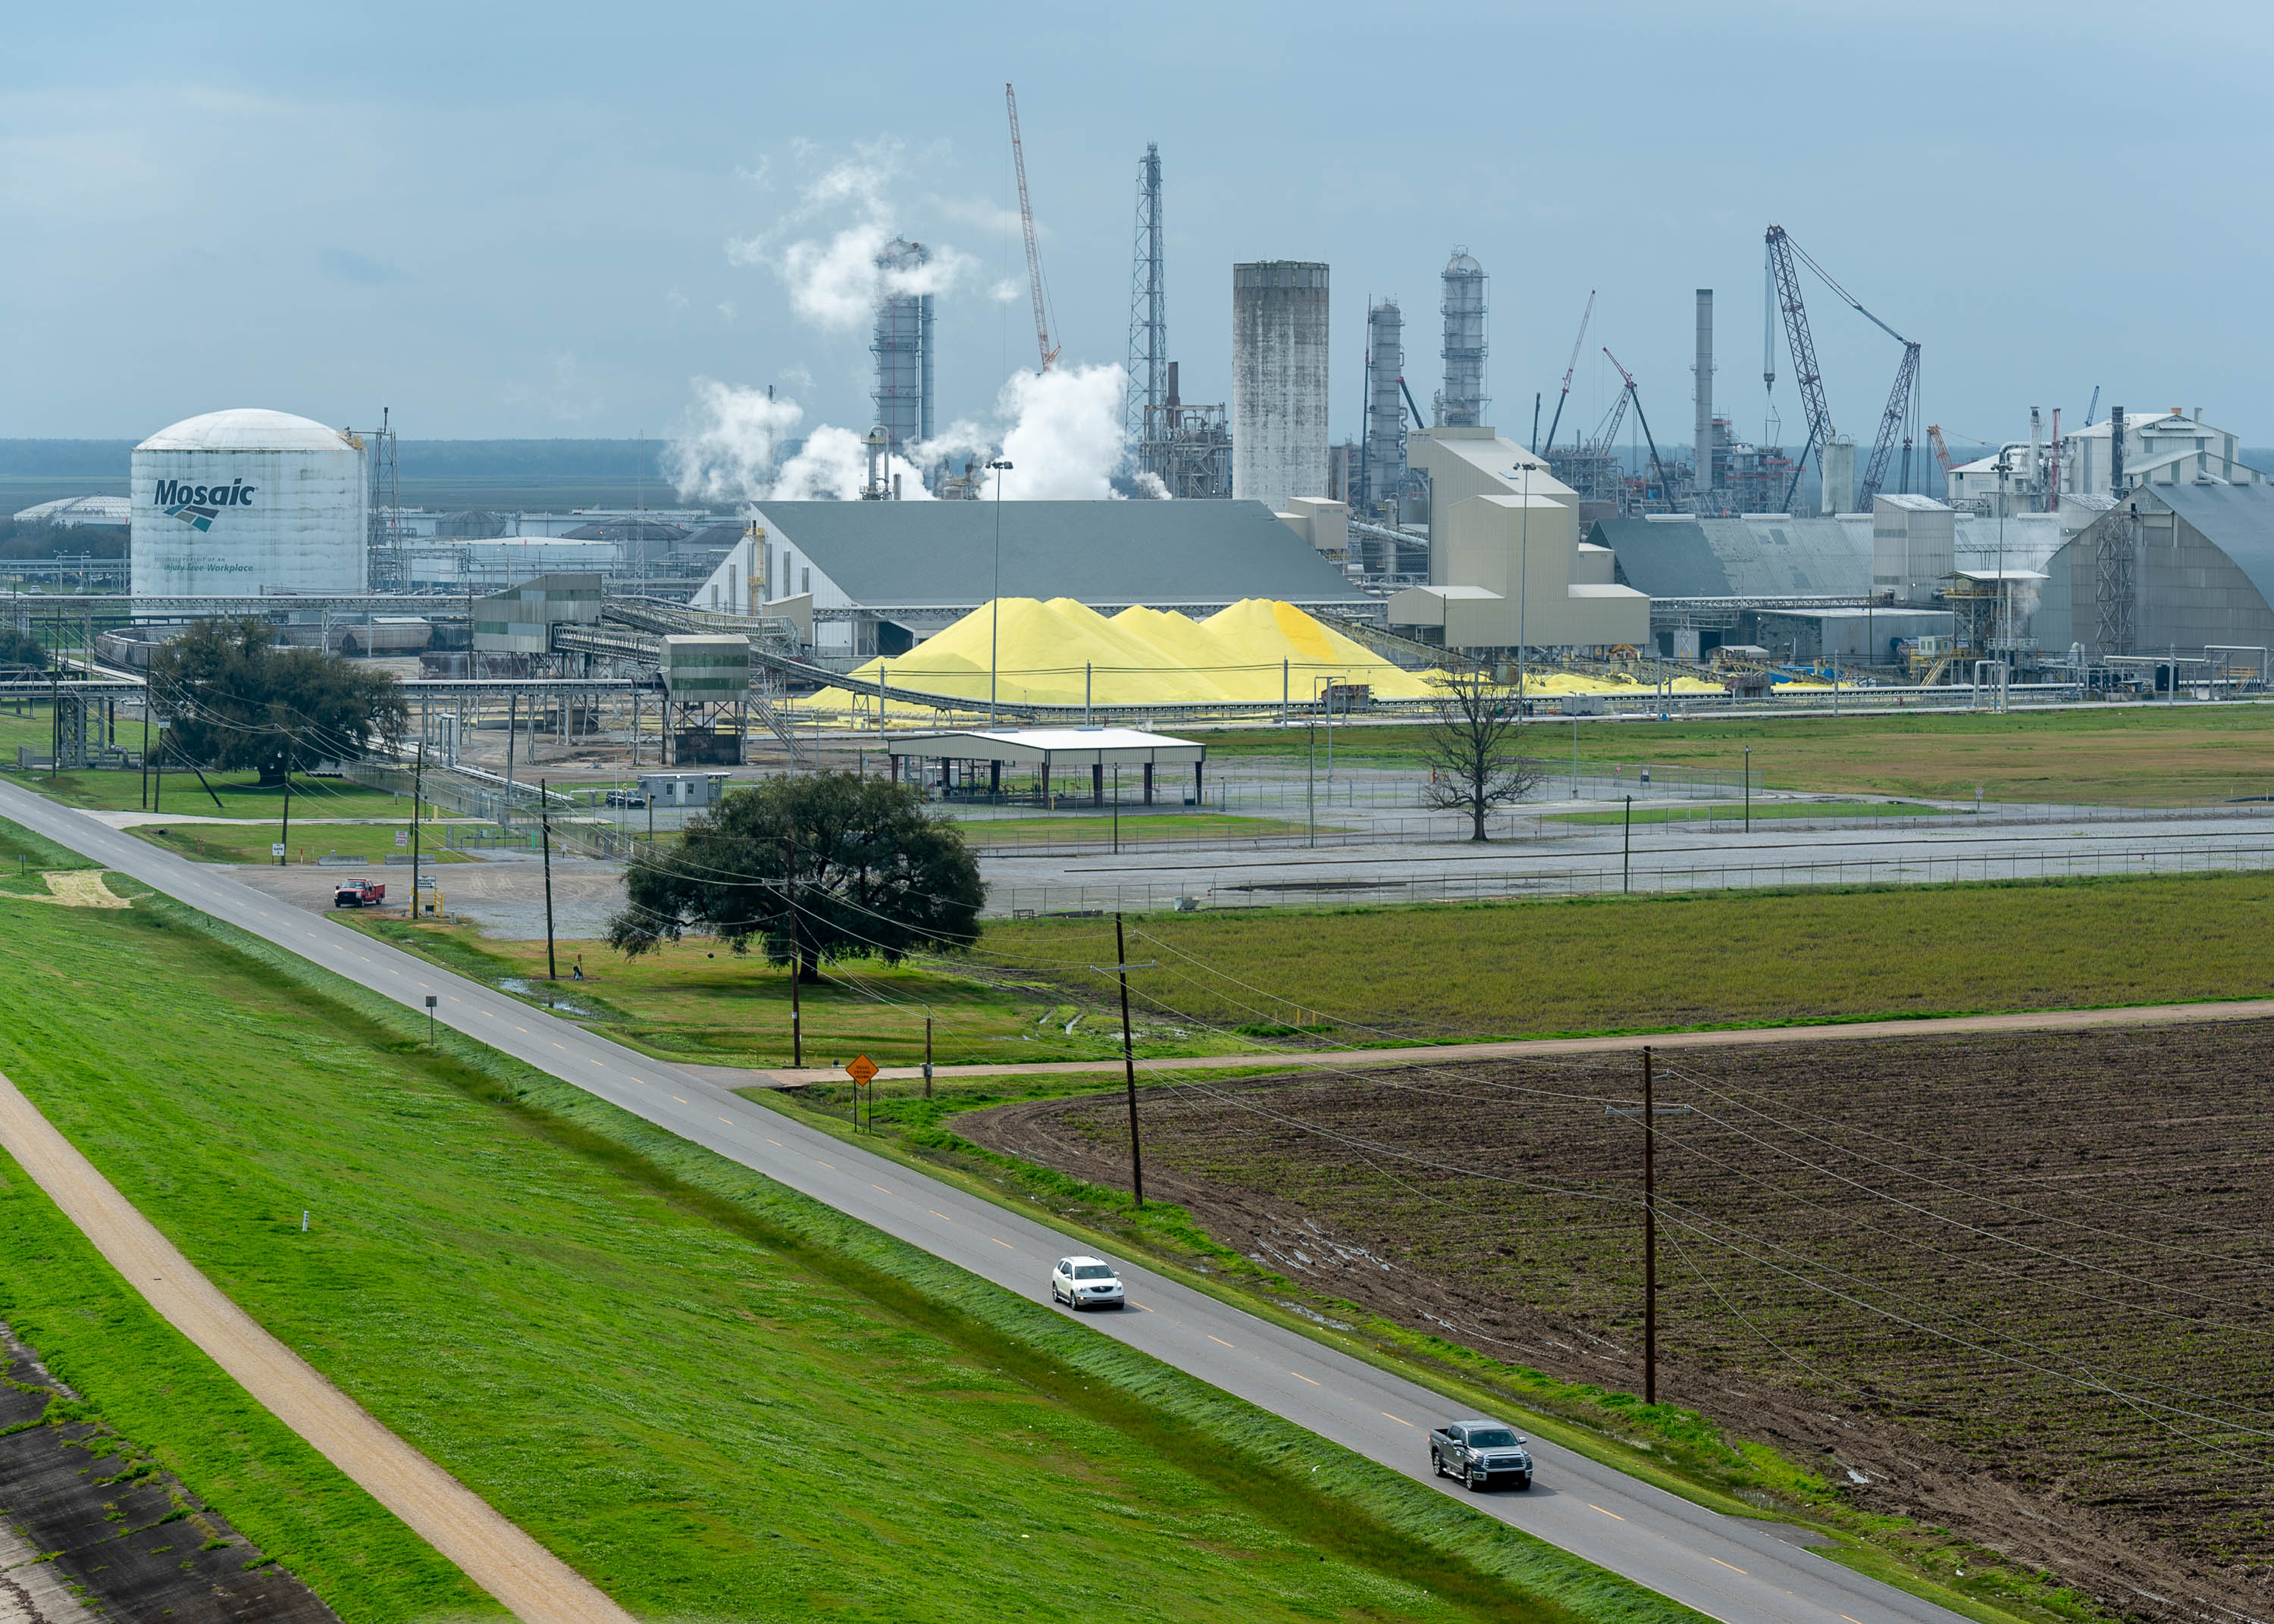 Mosaic Faustina Ammonia Plant in St. James Parish, pictured Feb. 11, 2020, is one of at least 150 petrochemical plants in the area residents say is contributing to increased cancer rates in the area.